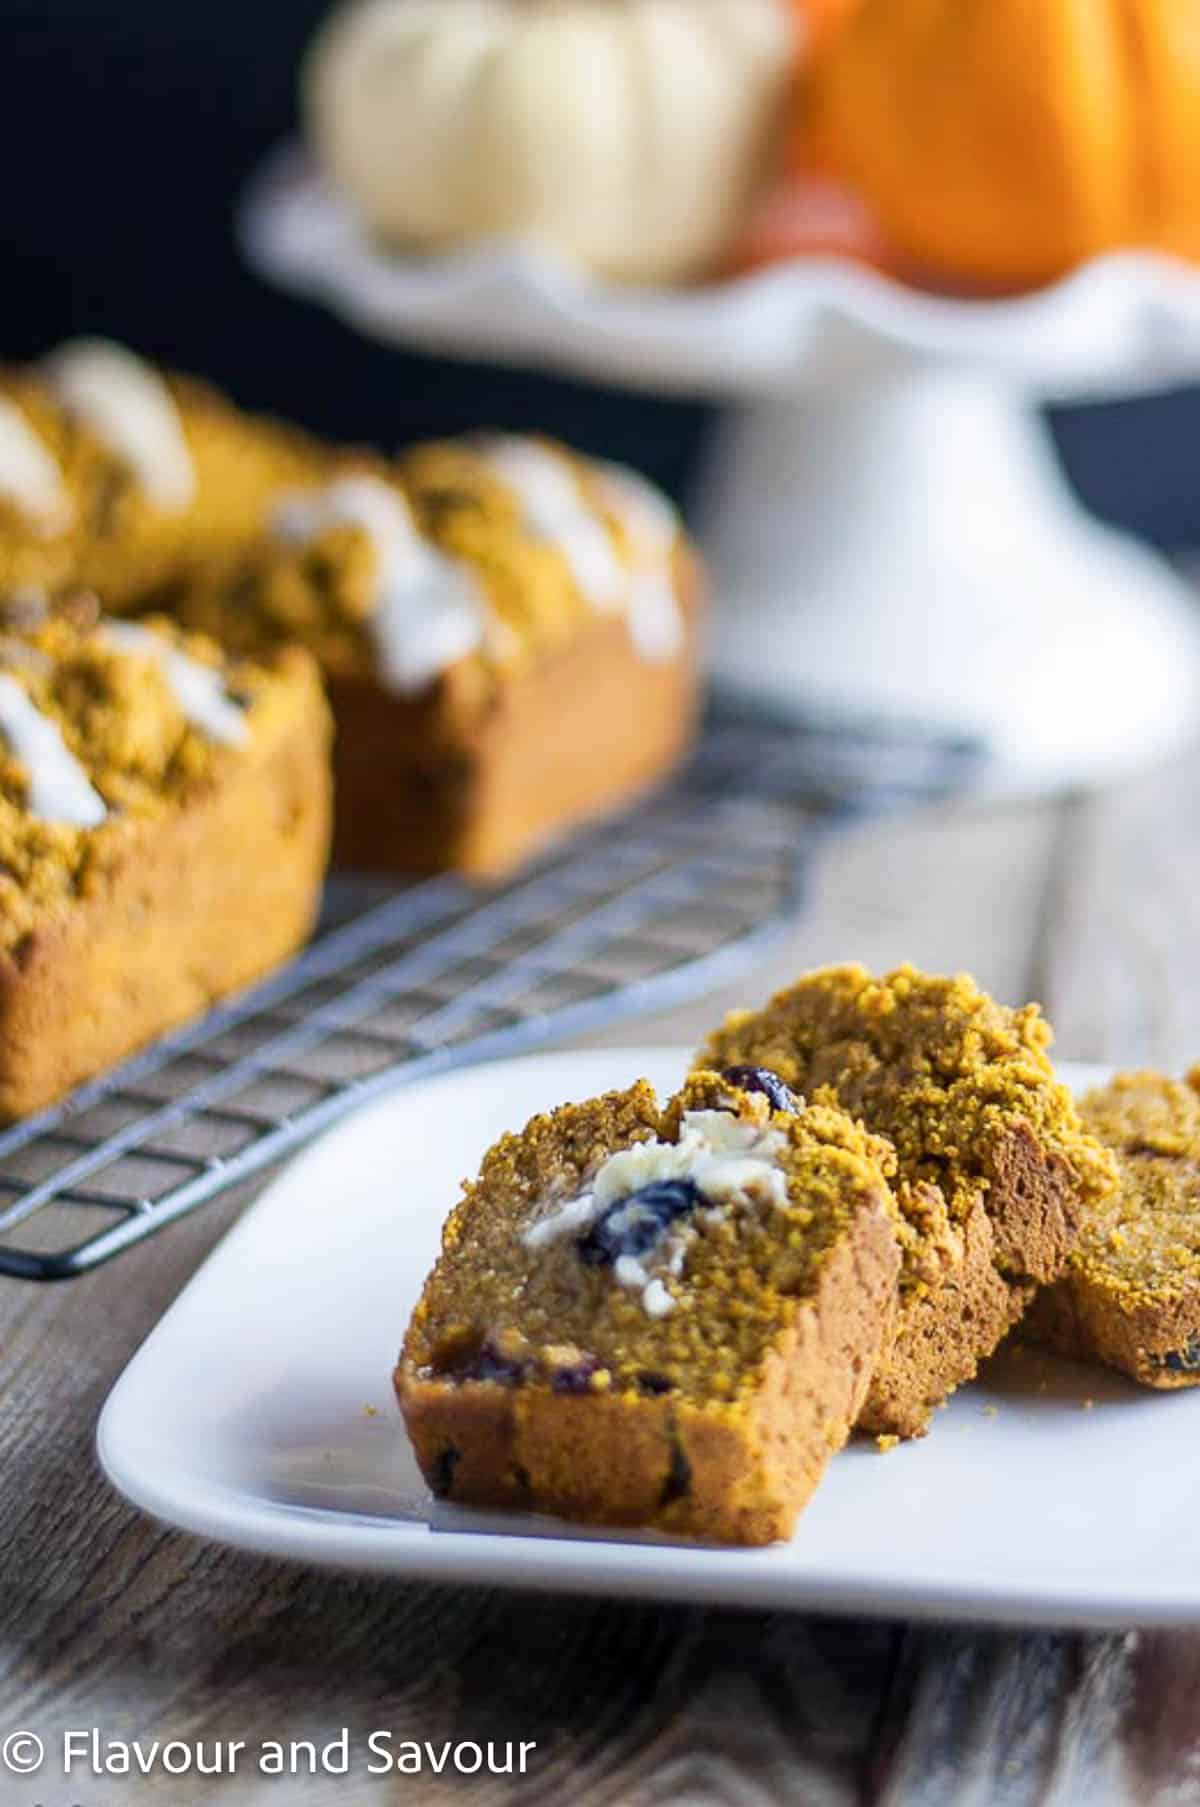 Slices of a mini gluten-free pumpkin loaf on a plate.